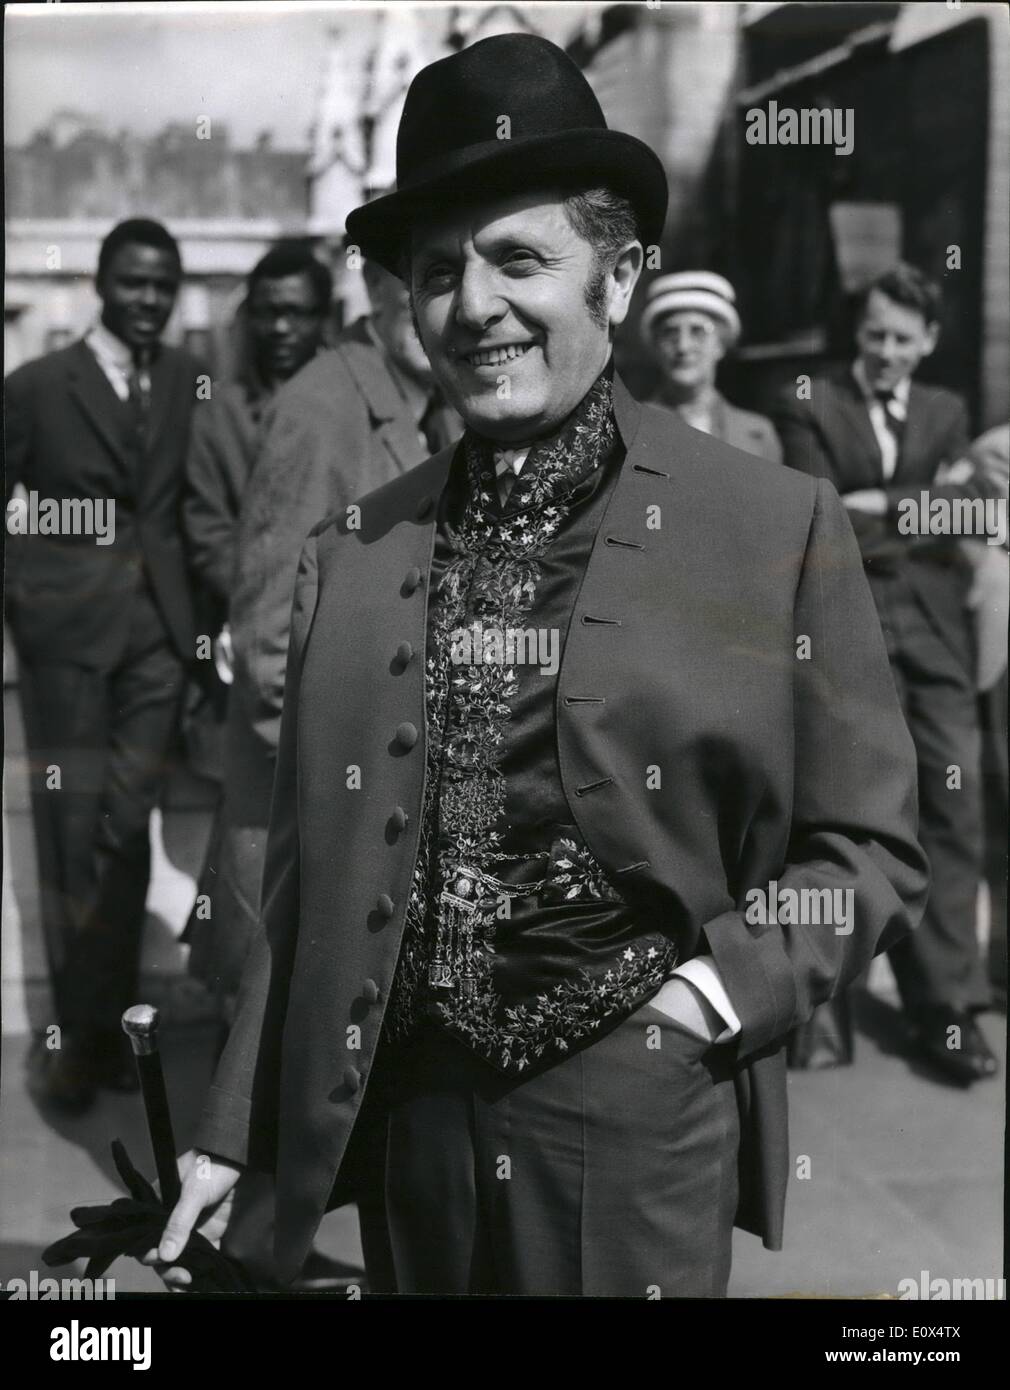 Apr. 04, 1965 - Mr. abse turns up for the budget in his ''hot suit'' : Mr. Leo Abse the labour M.p. for pontypool turned up at the house of commons today for the budget wearing securry -colored suit - with a strong 18th. century influence - including a waistcoat of the period. This outfit was topped by a very special hat which he had imported from Paris. Mr. Abse makes a point of being strikingly dressed for all parliamentary occasions. photo shows Mr. Leo Abse - with his ''hot Suit'' - waistcoat and hat - on arrival at st. stephen's entrance - for the budget today. Stock Photo